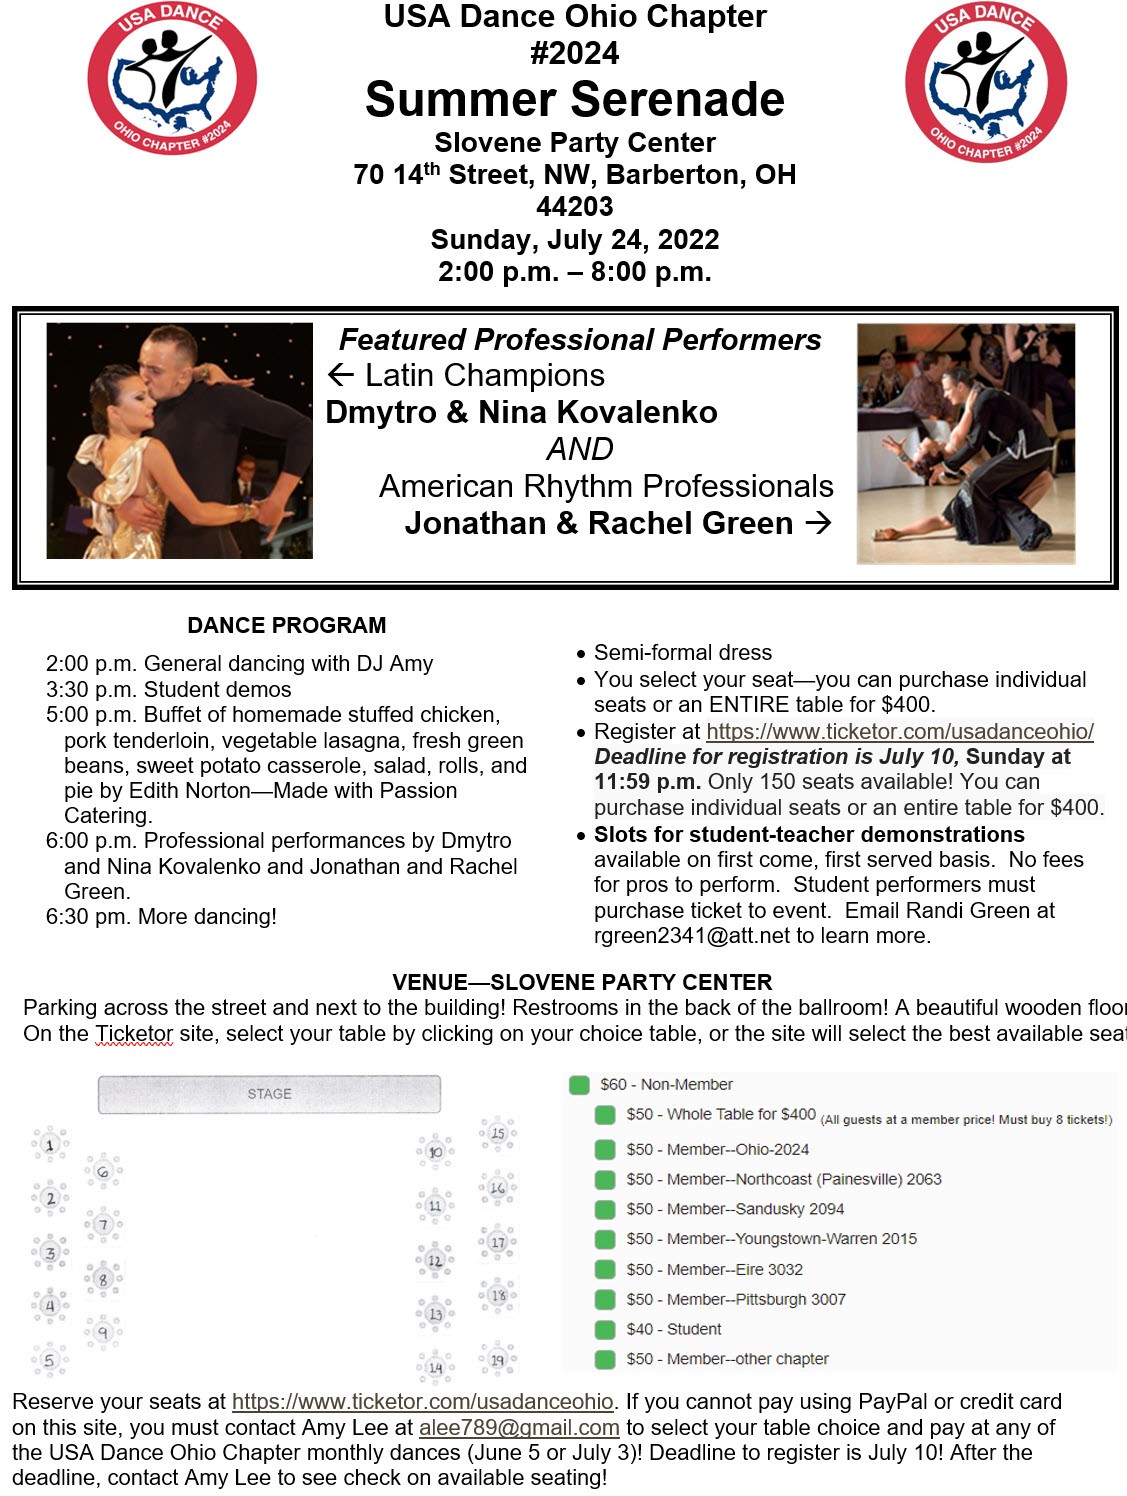 USA Dance Ohio Chapter Summer Serenade at the Slovene Party Center  on Jul 24, 14:00@Slovene Center - Pick a seat, Buy tickets and Get information on USA Dance Ohio Chapter 